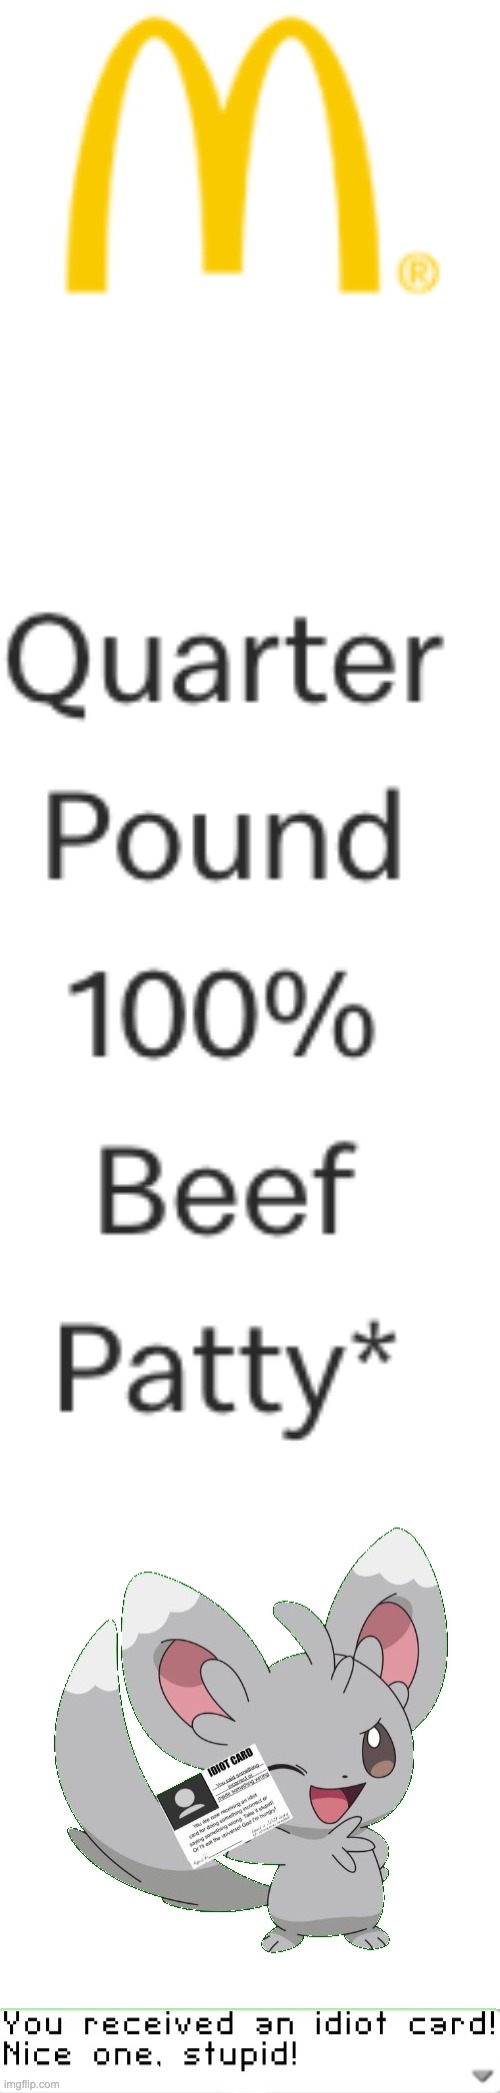 That's not a quarter pound 100% beef patty, you received an idiot card for that. | image tagged in you received an idiot card,quarter,pound,beef,patty,nice | made w/ Imgflip meme maker